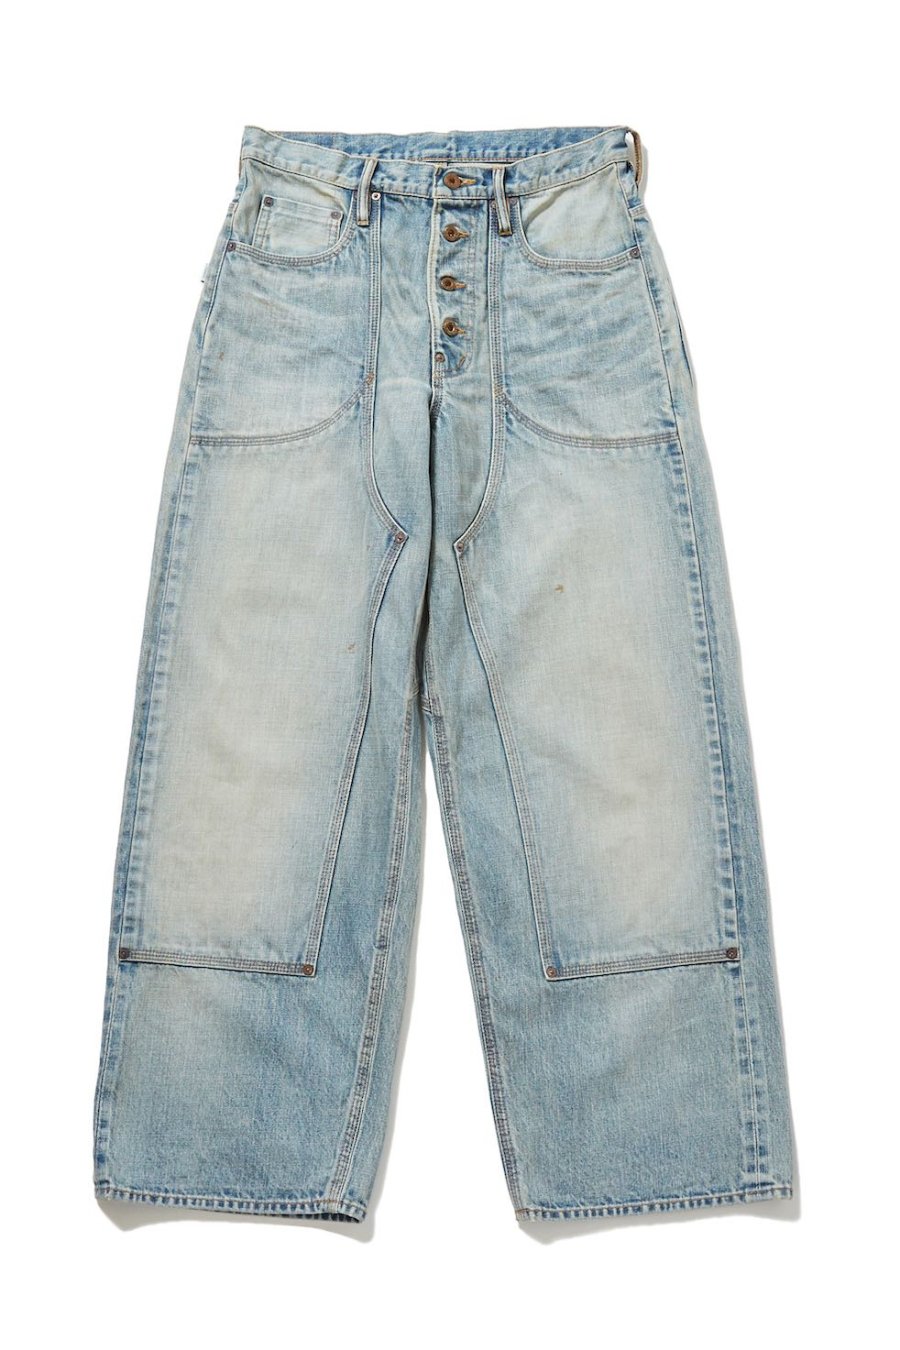 SUGARHILL  FADED DOUBLE KNEE DENIM PANTS-2<img class='new_mark_img2' src='https://img.shop-pro.jp/img/new/icons15.gif' style='border:none;display:inline;margin:0px;padding:0px;width:auto;' />